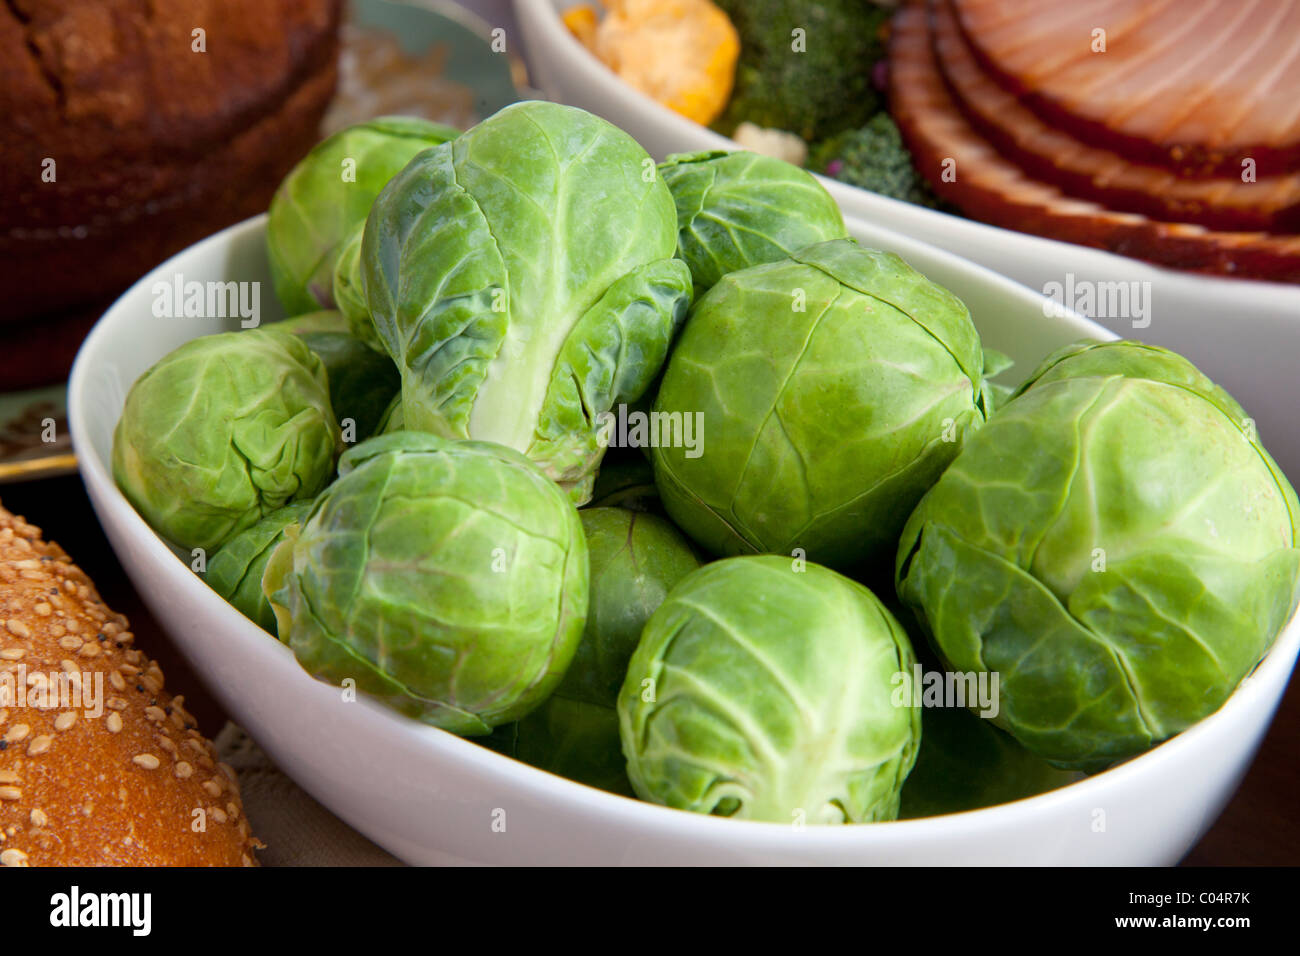 brussels sprout brussel sprouts in bowl Stock Photo